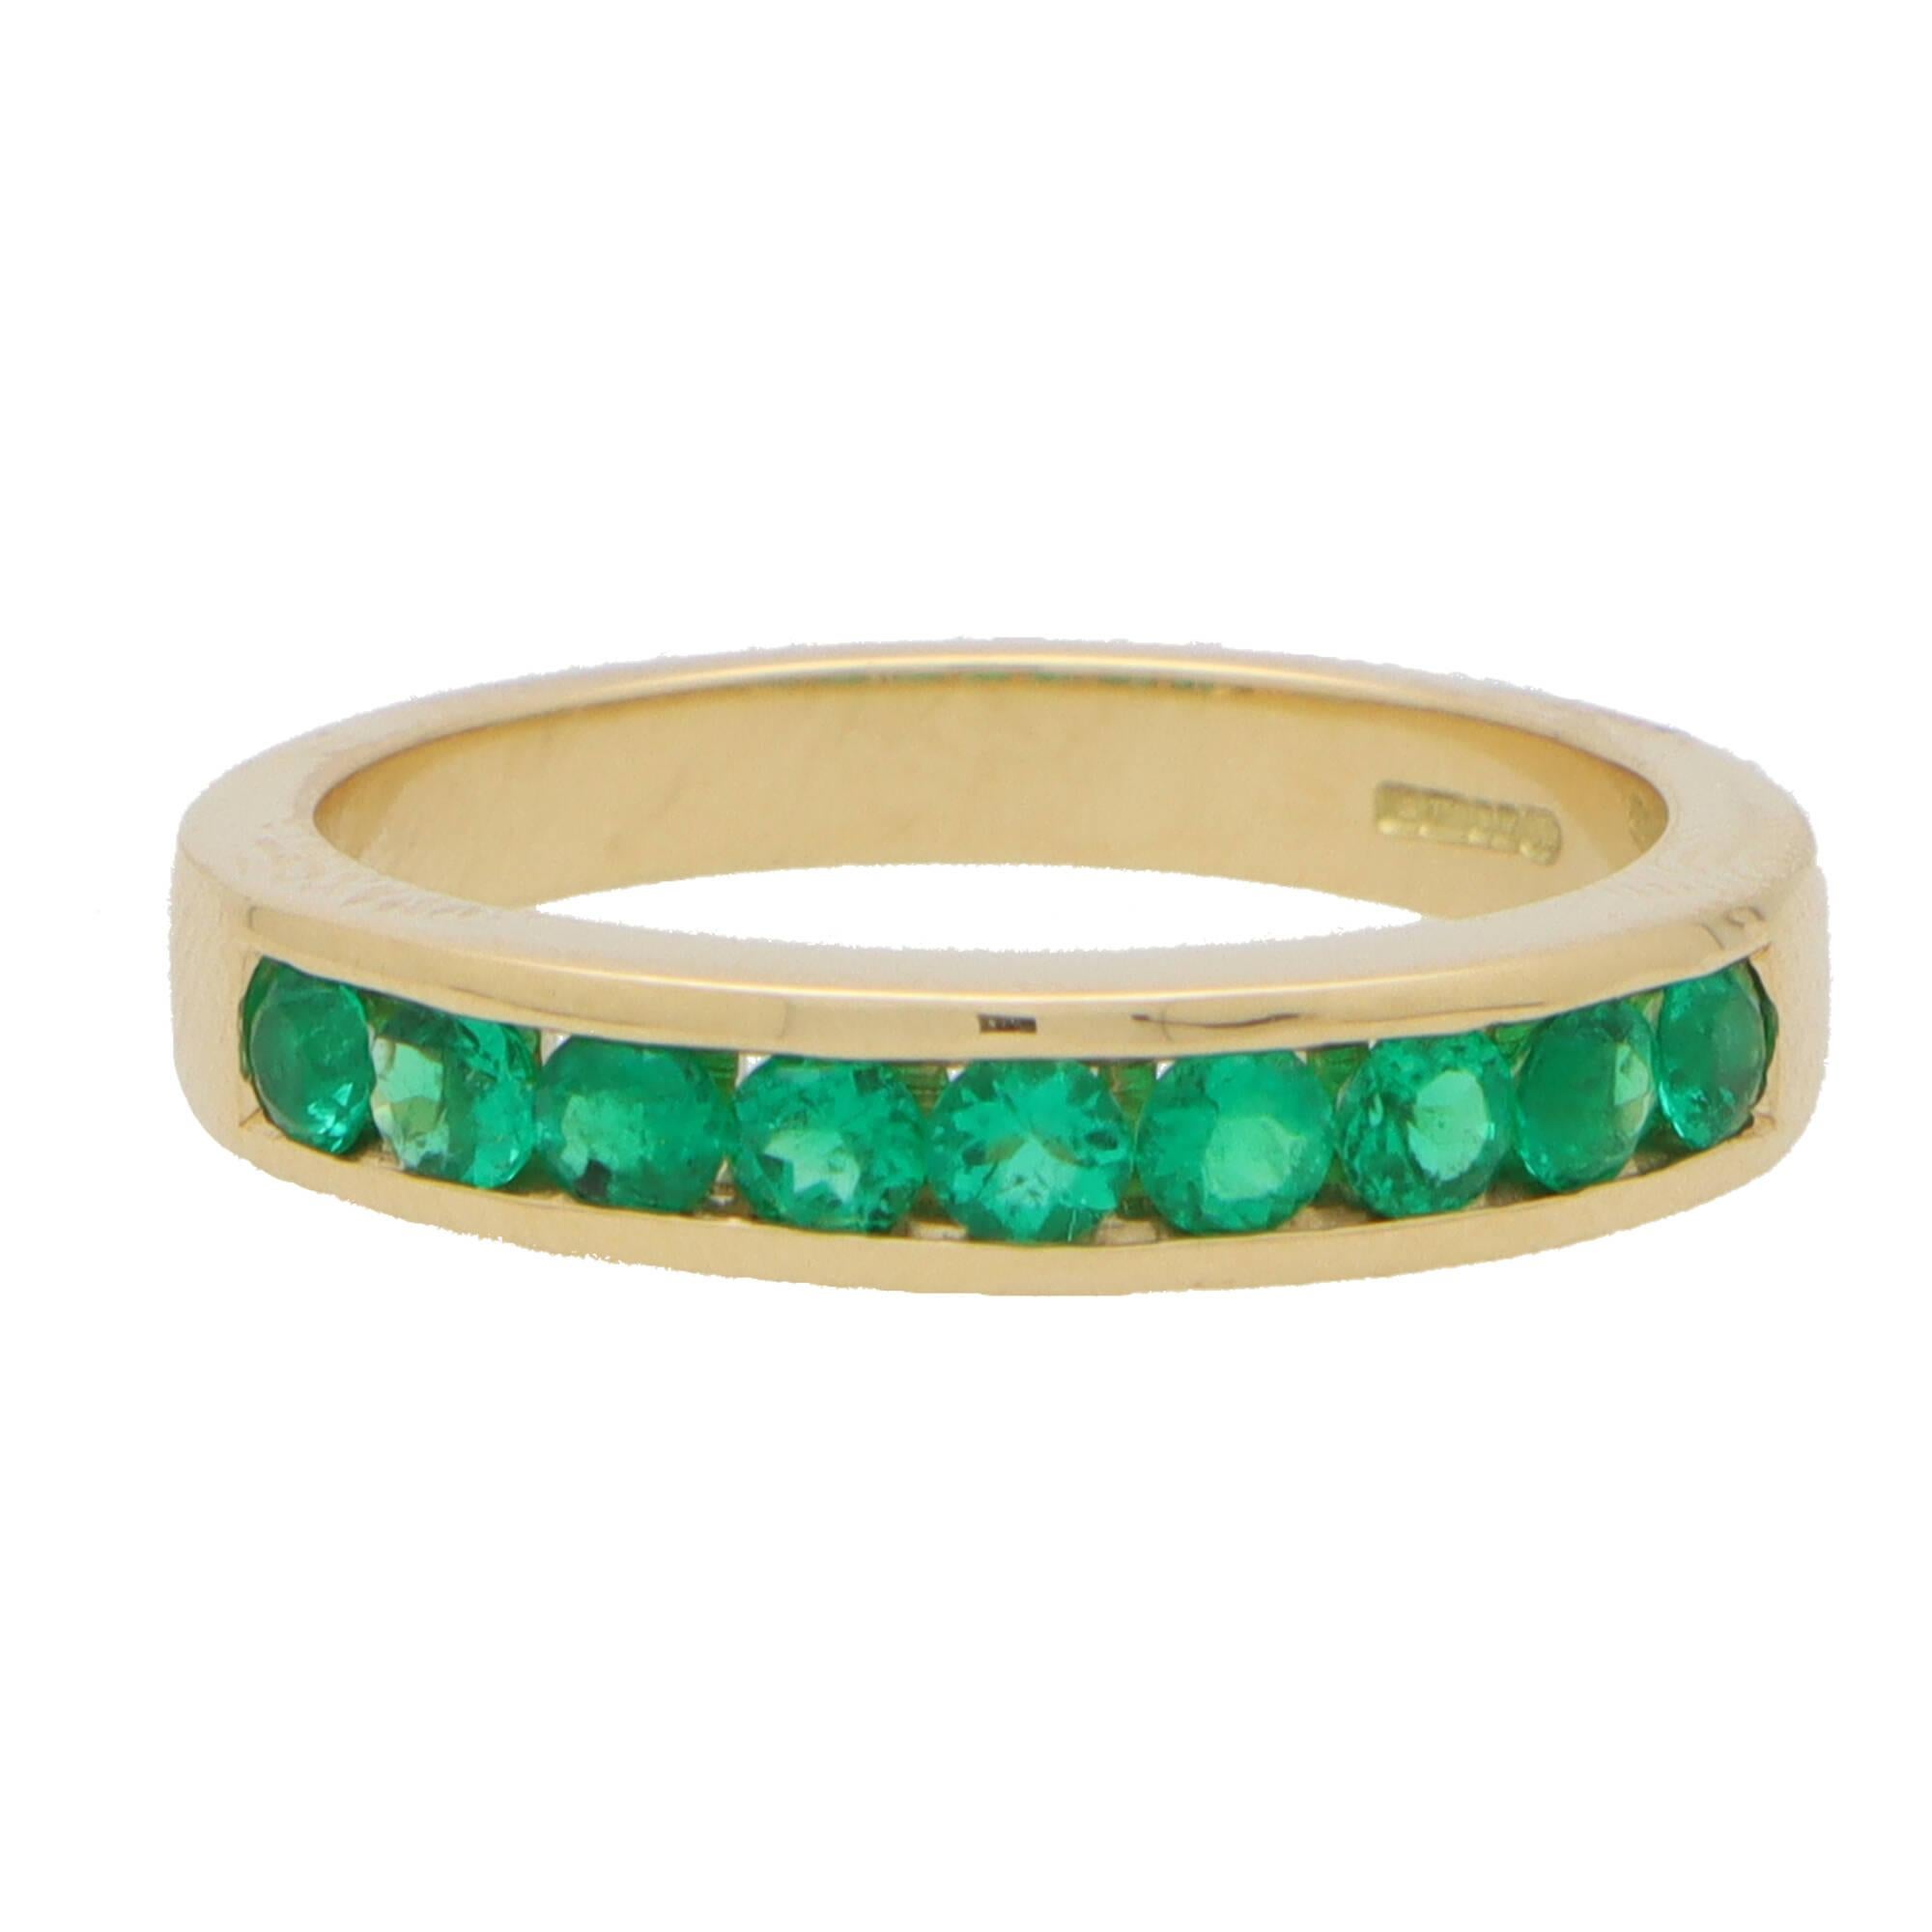 A beautiful emerald half eternity ring set in 18k yellow gold.

The ring is composed of 9 round cut emerald stones altogether which have been perfectly matched it colour and lustre. All the stones are securely bezel set within a 4mm yellow gold